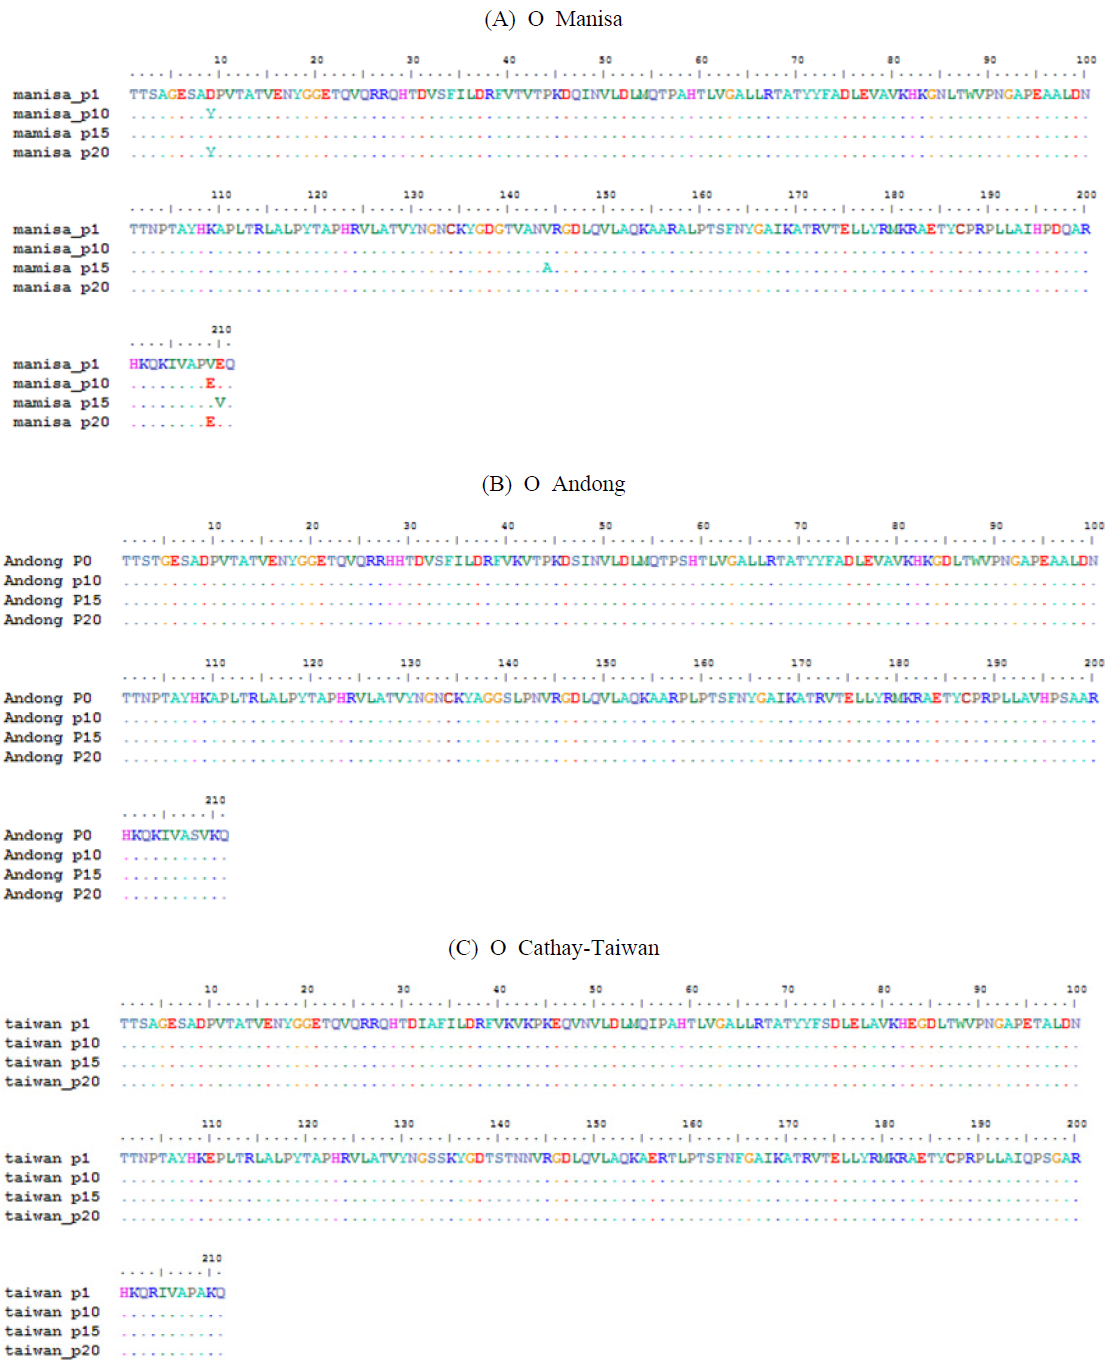 Sequence of O type viruses(O mansia, O Andong, O Taiwan) after serial passage under the neutralizing antibody from E. coli vaccine -immunized cattle